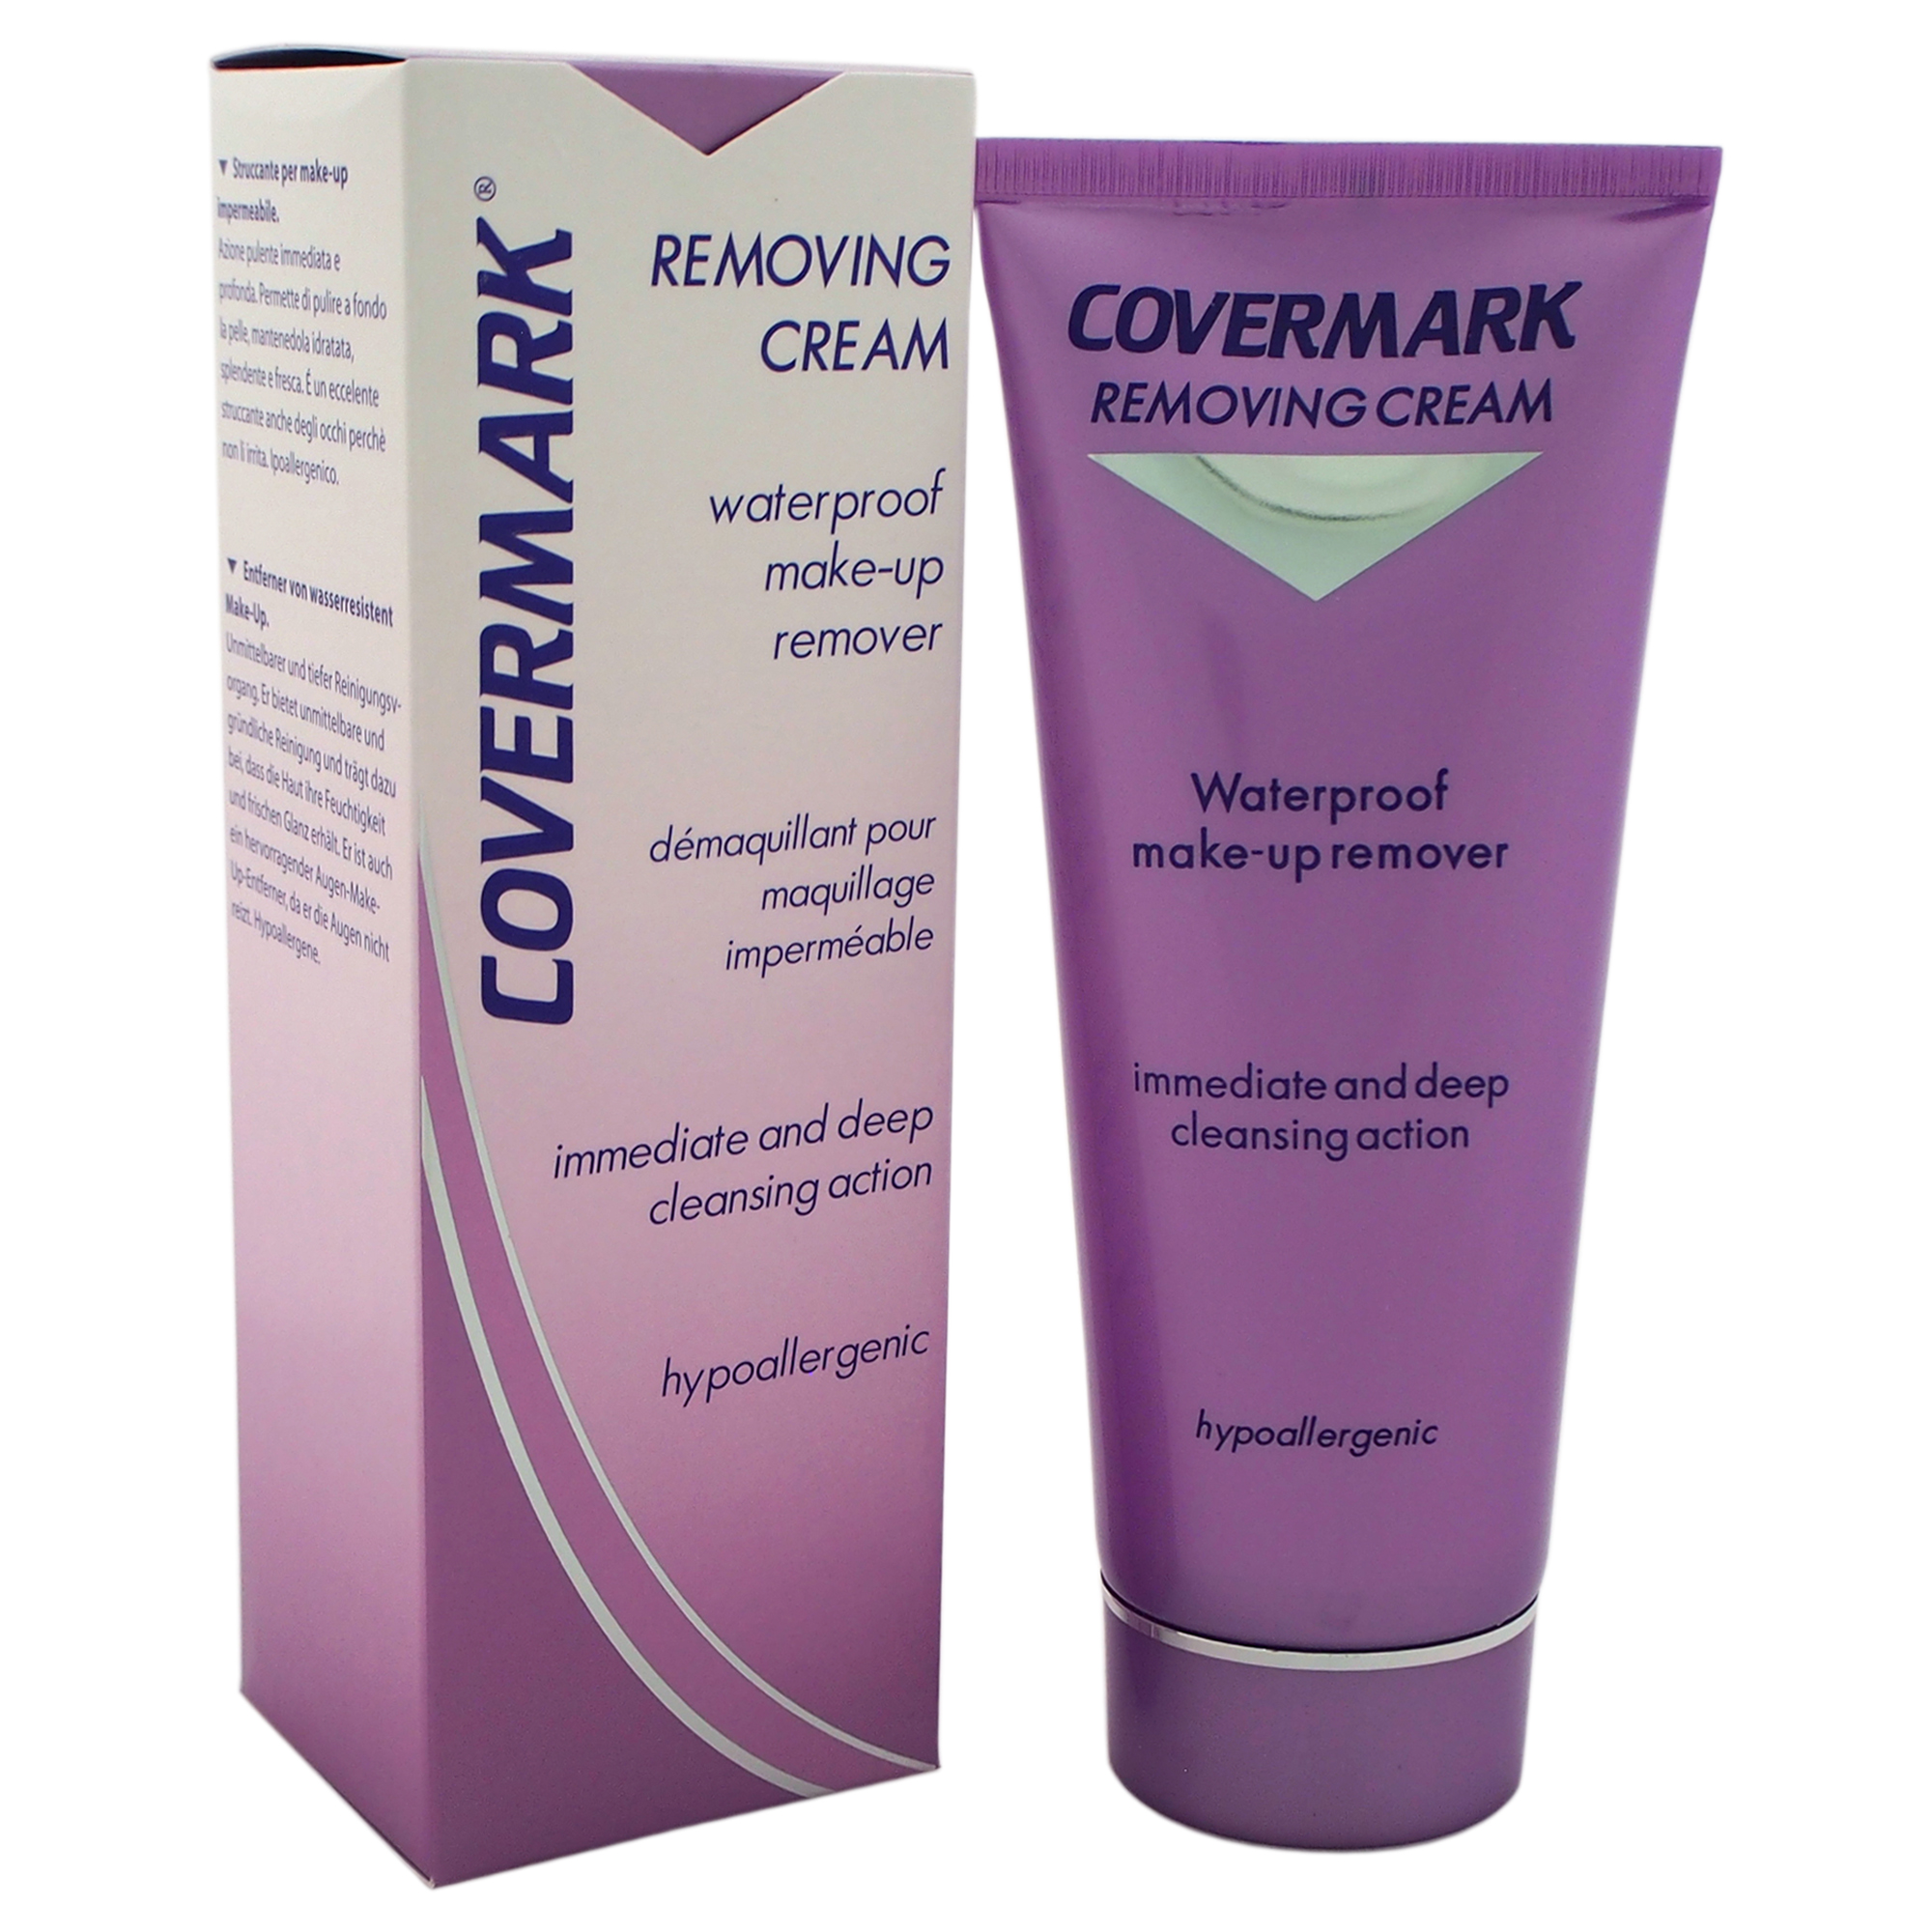 Covermark Removing Cream Make-Up Remover Waterproof